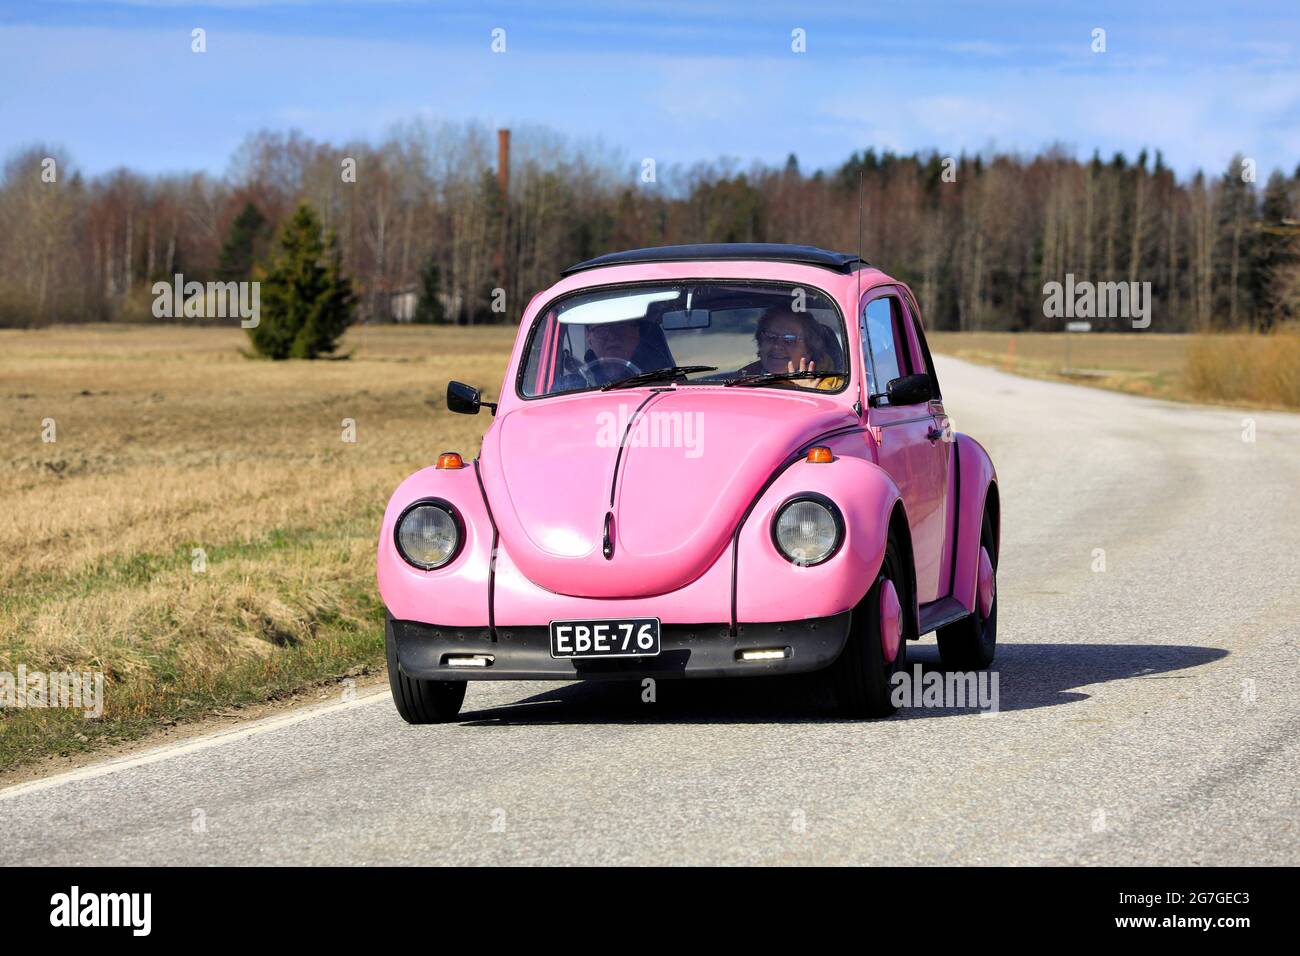 Pink Volkswagen Beetle, officially Volkswagen Type 1, in excellent condition, at speed on rural road in Salo, Finland. May 2, 2021. Stock Photo